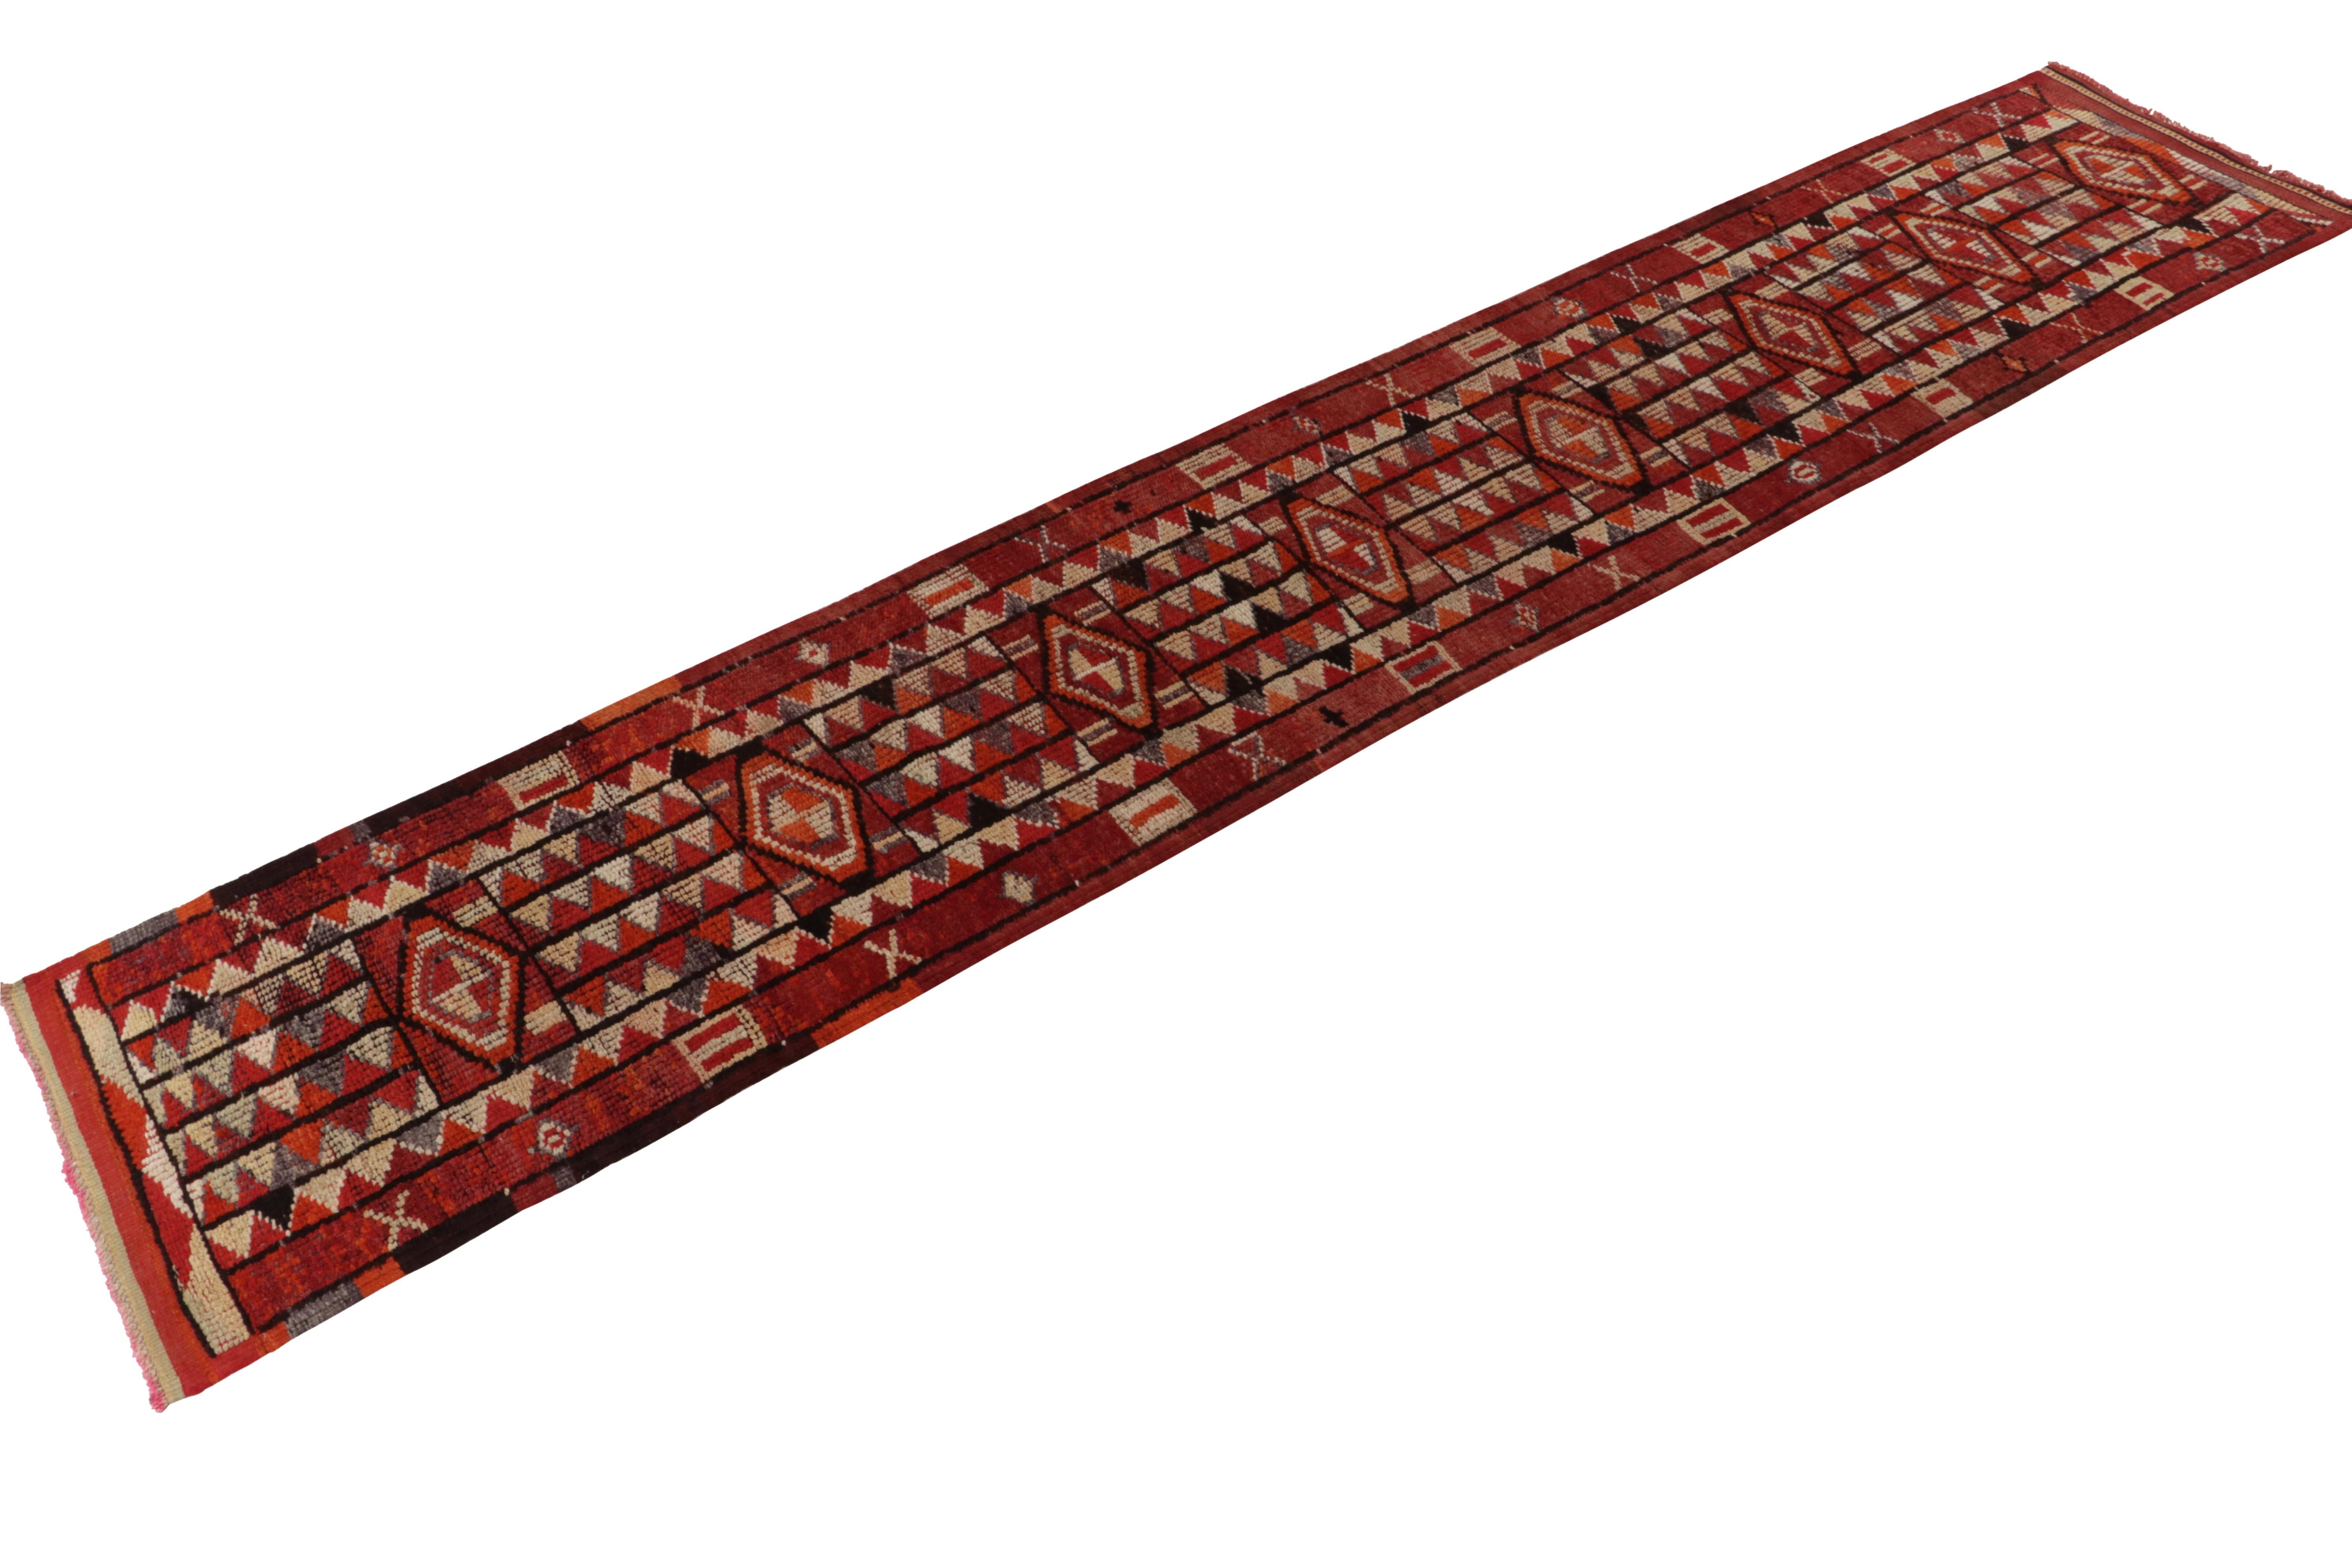 From Rug & Kilim’s rare curation of pieces in this size, a 3x16 vintage tribal kilim runner finely woven in a brilliant blend of yarns. 

This vivid, unusual use of traditional elements achieves the most lively sense of movement in a